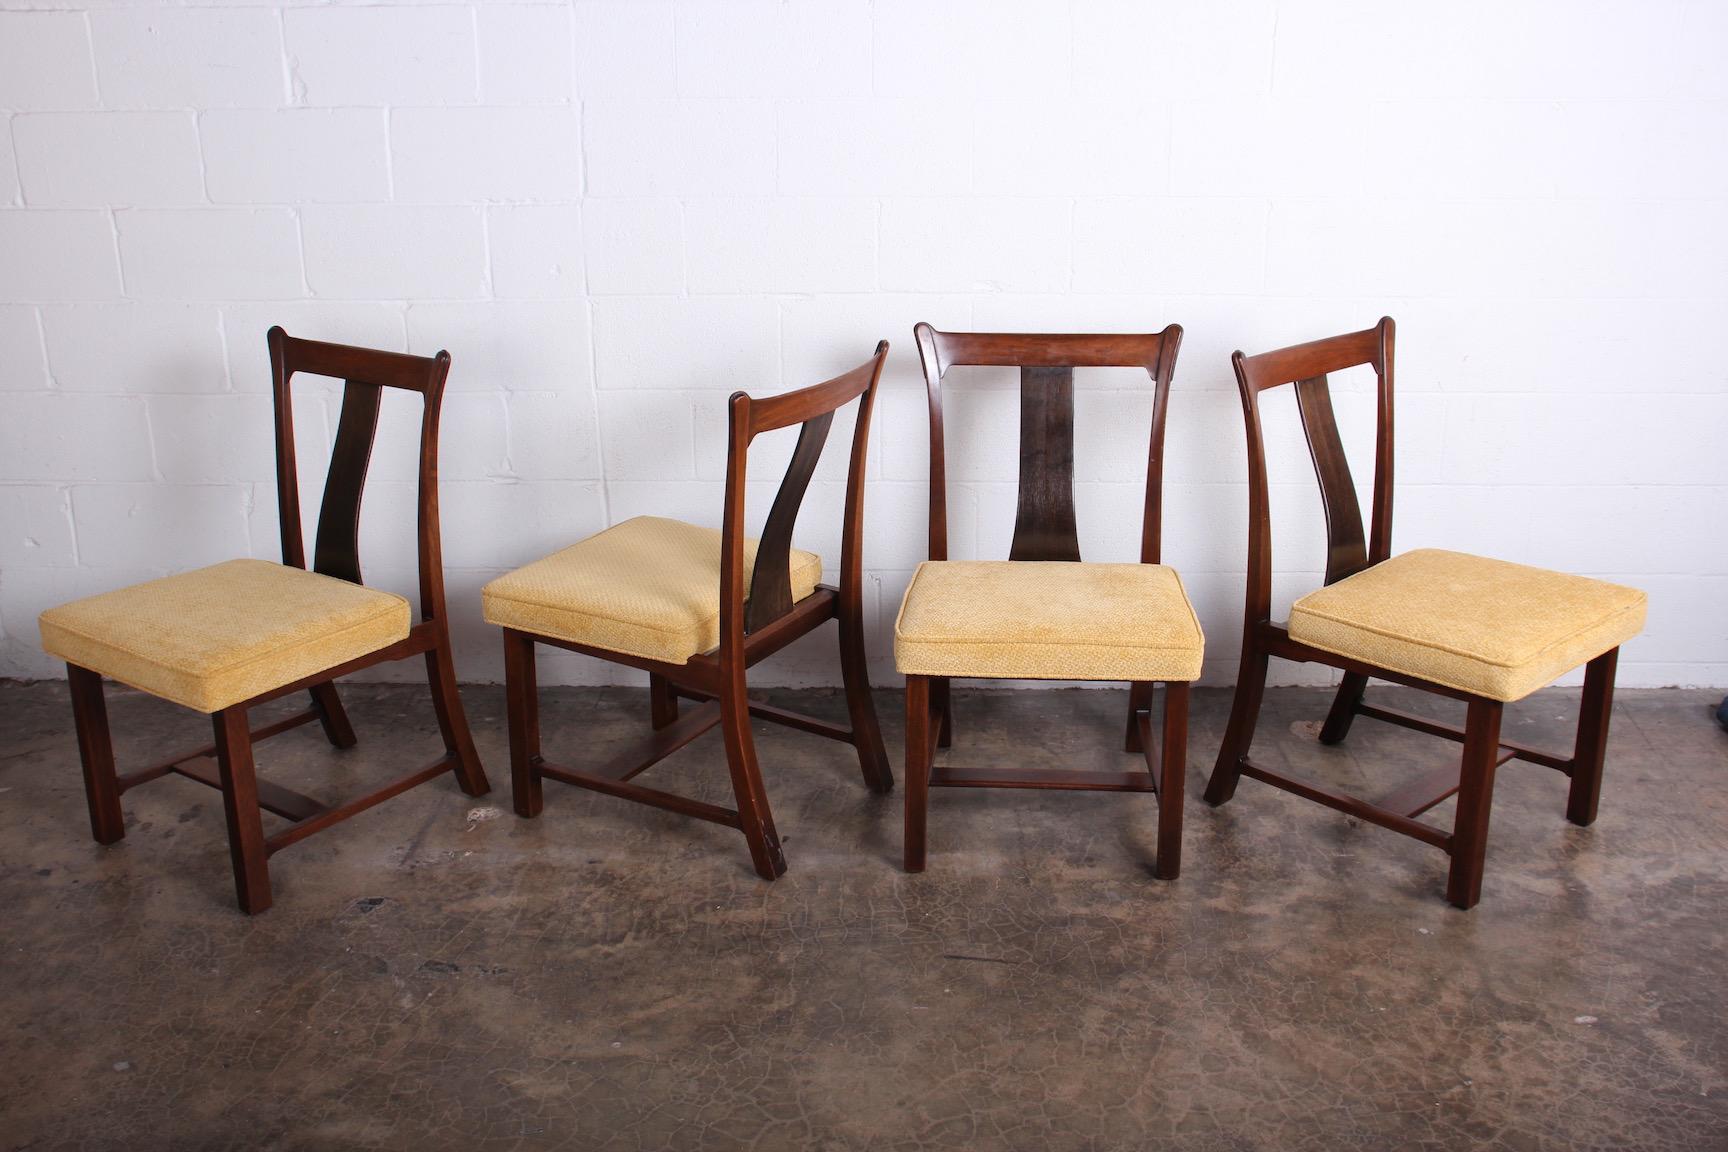 A rare set of four dining / game chairs from the Janus collection known as the Greene & Greene chairs for their crafted details. Designed by Edward Wormley for Dunbar.